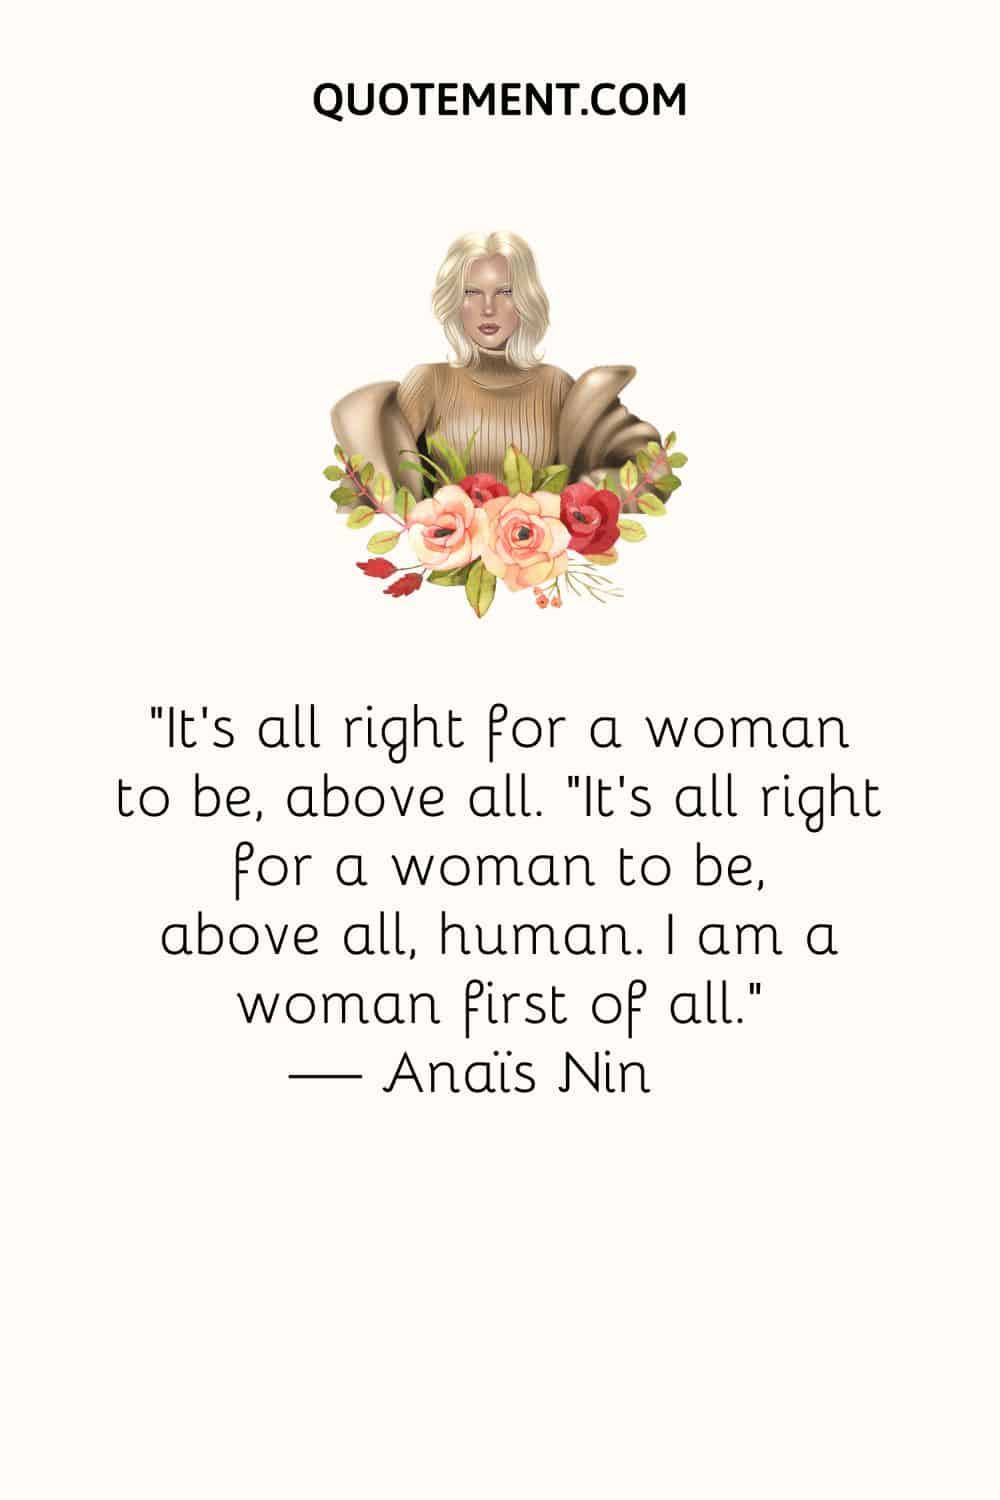 It's all right for a woman to be, above all. “It's all right for a woman to be, above all, human. I am a woman first of all